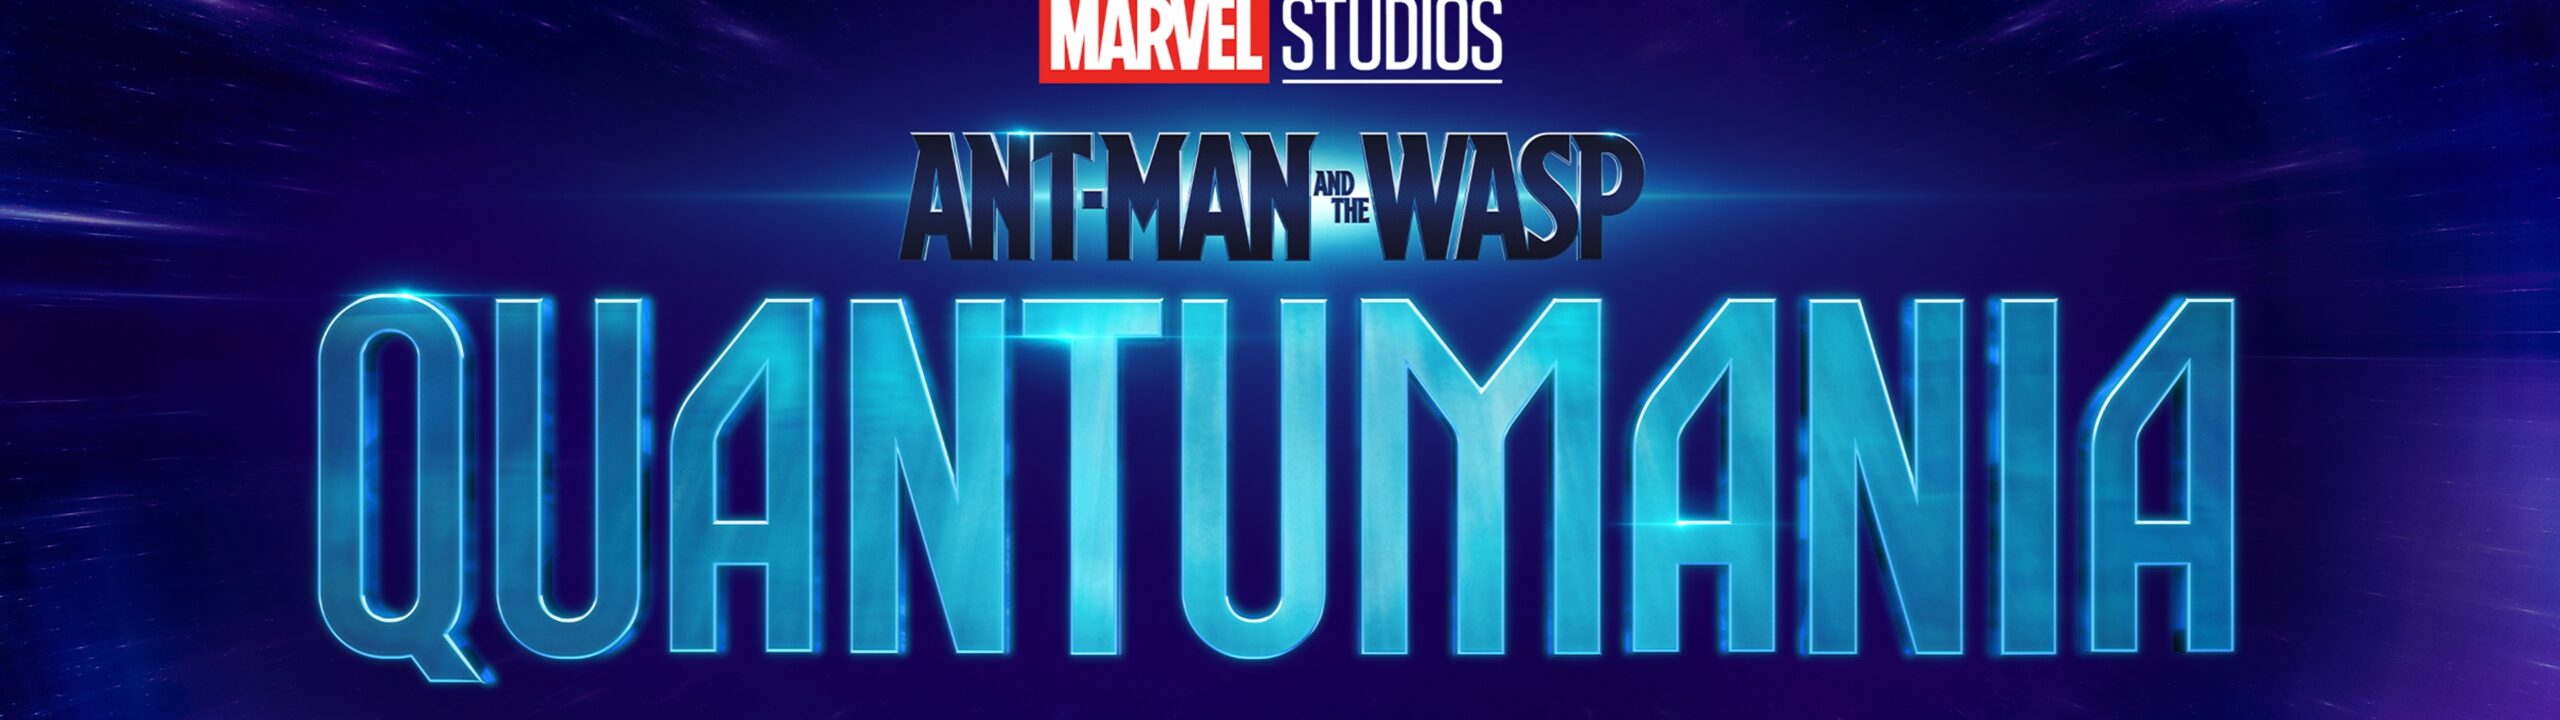 wp12004841 ant man and the wasp quantumania wallpapers scaled